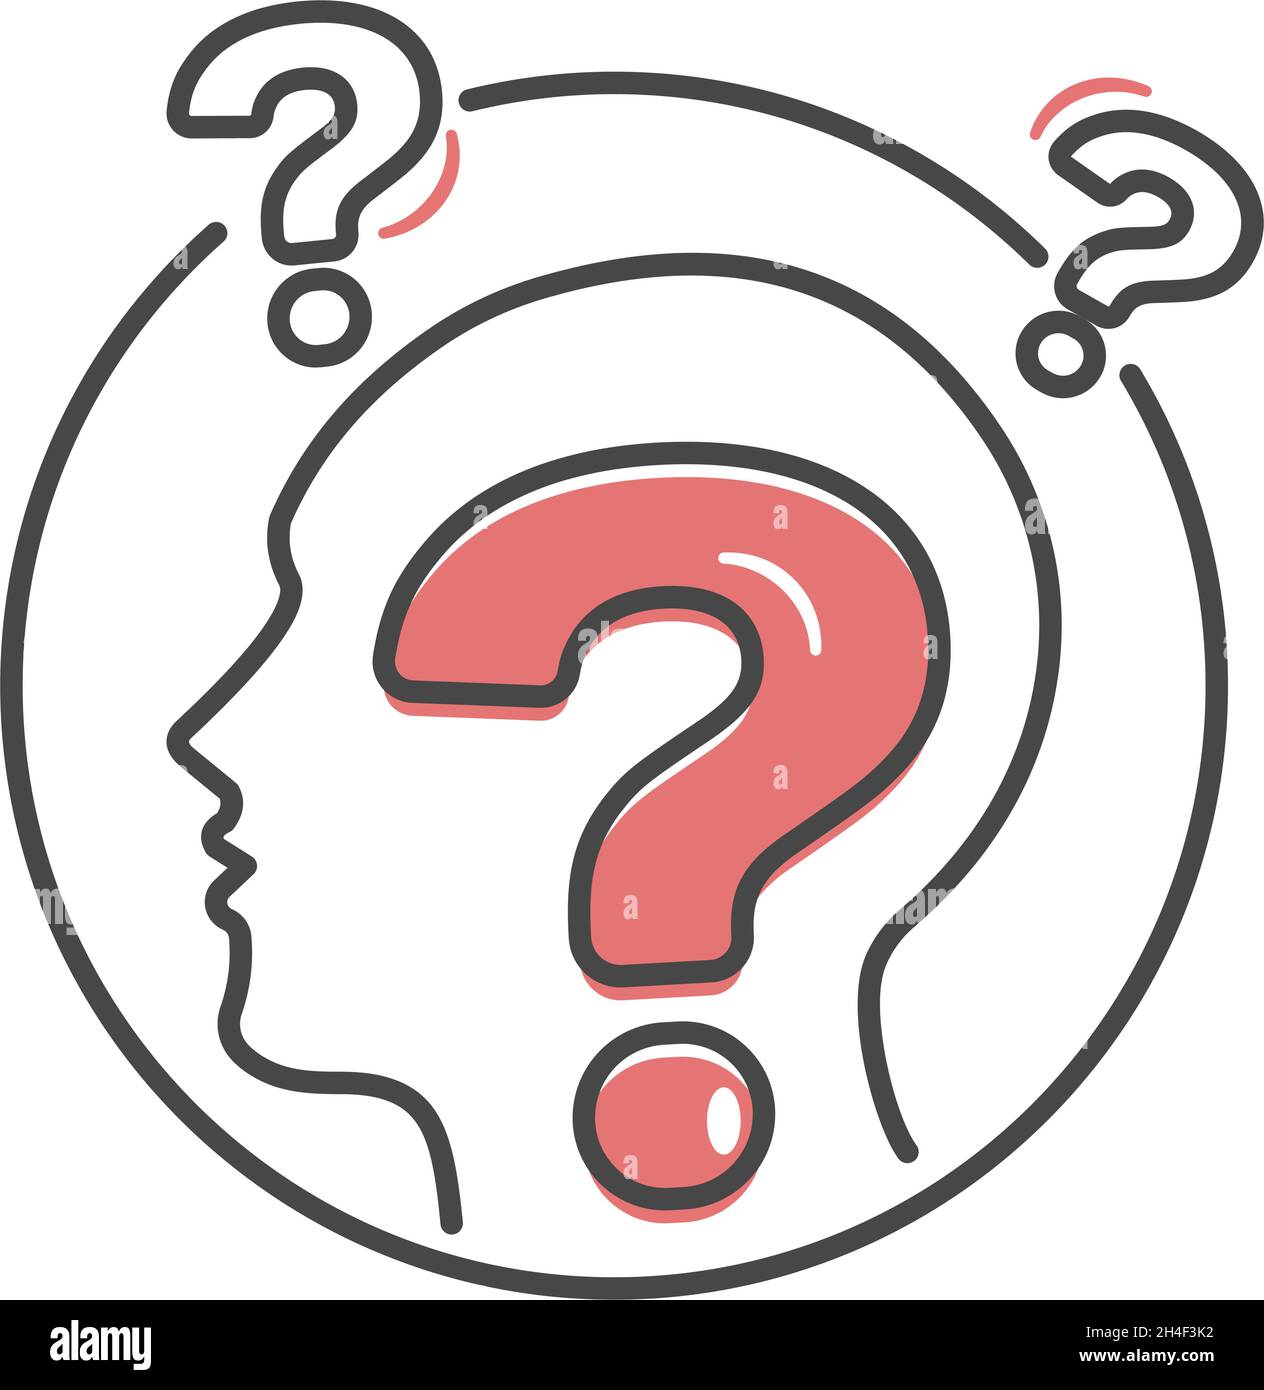 Human head with question marks. Problem solving concept. Puzzle. Flat style illustration. Stock Vector